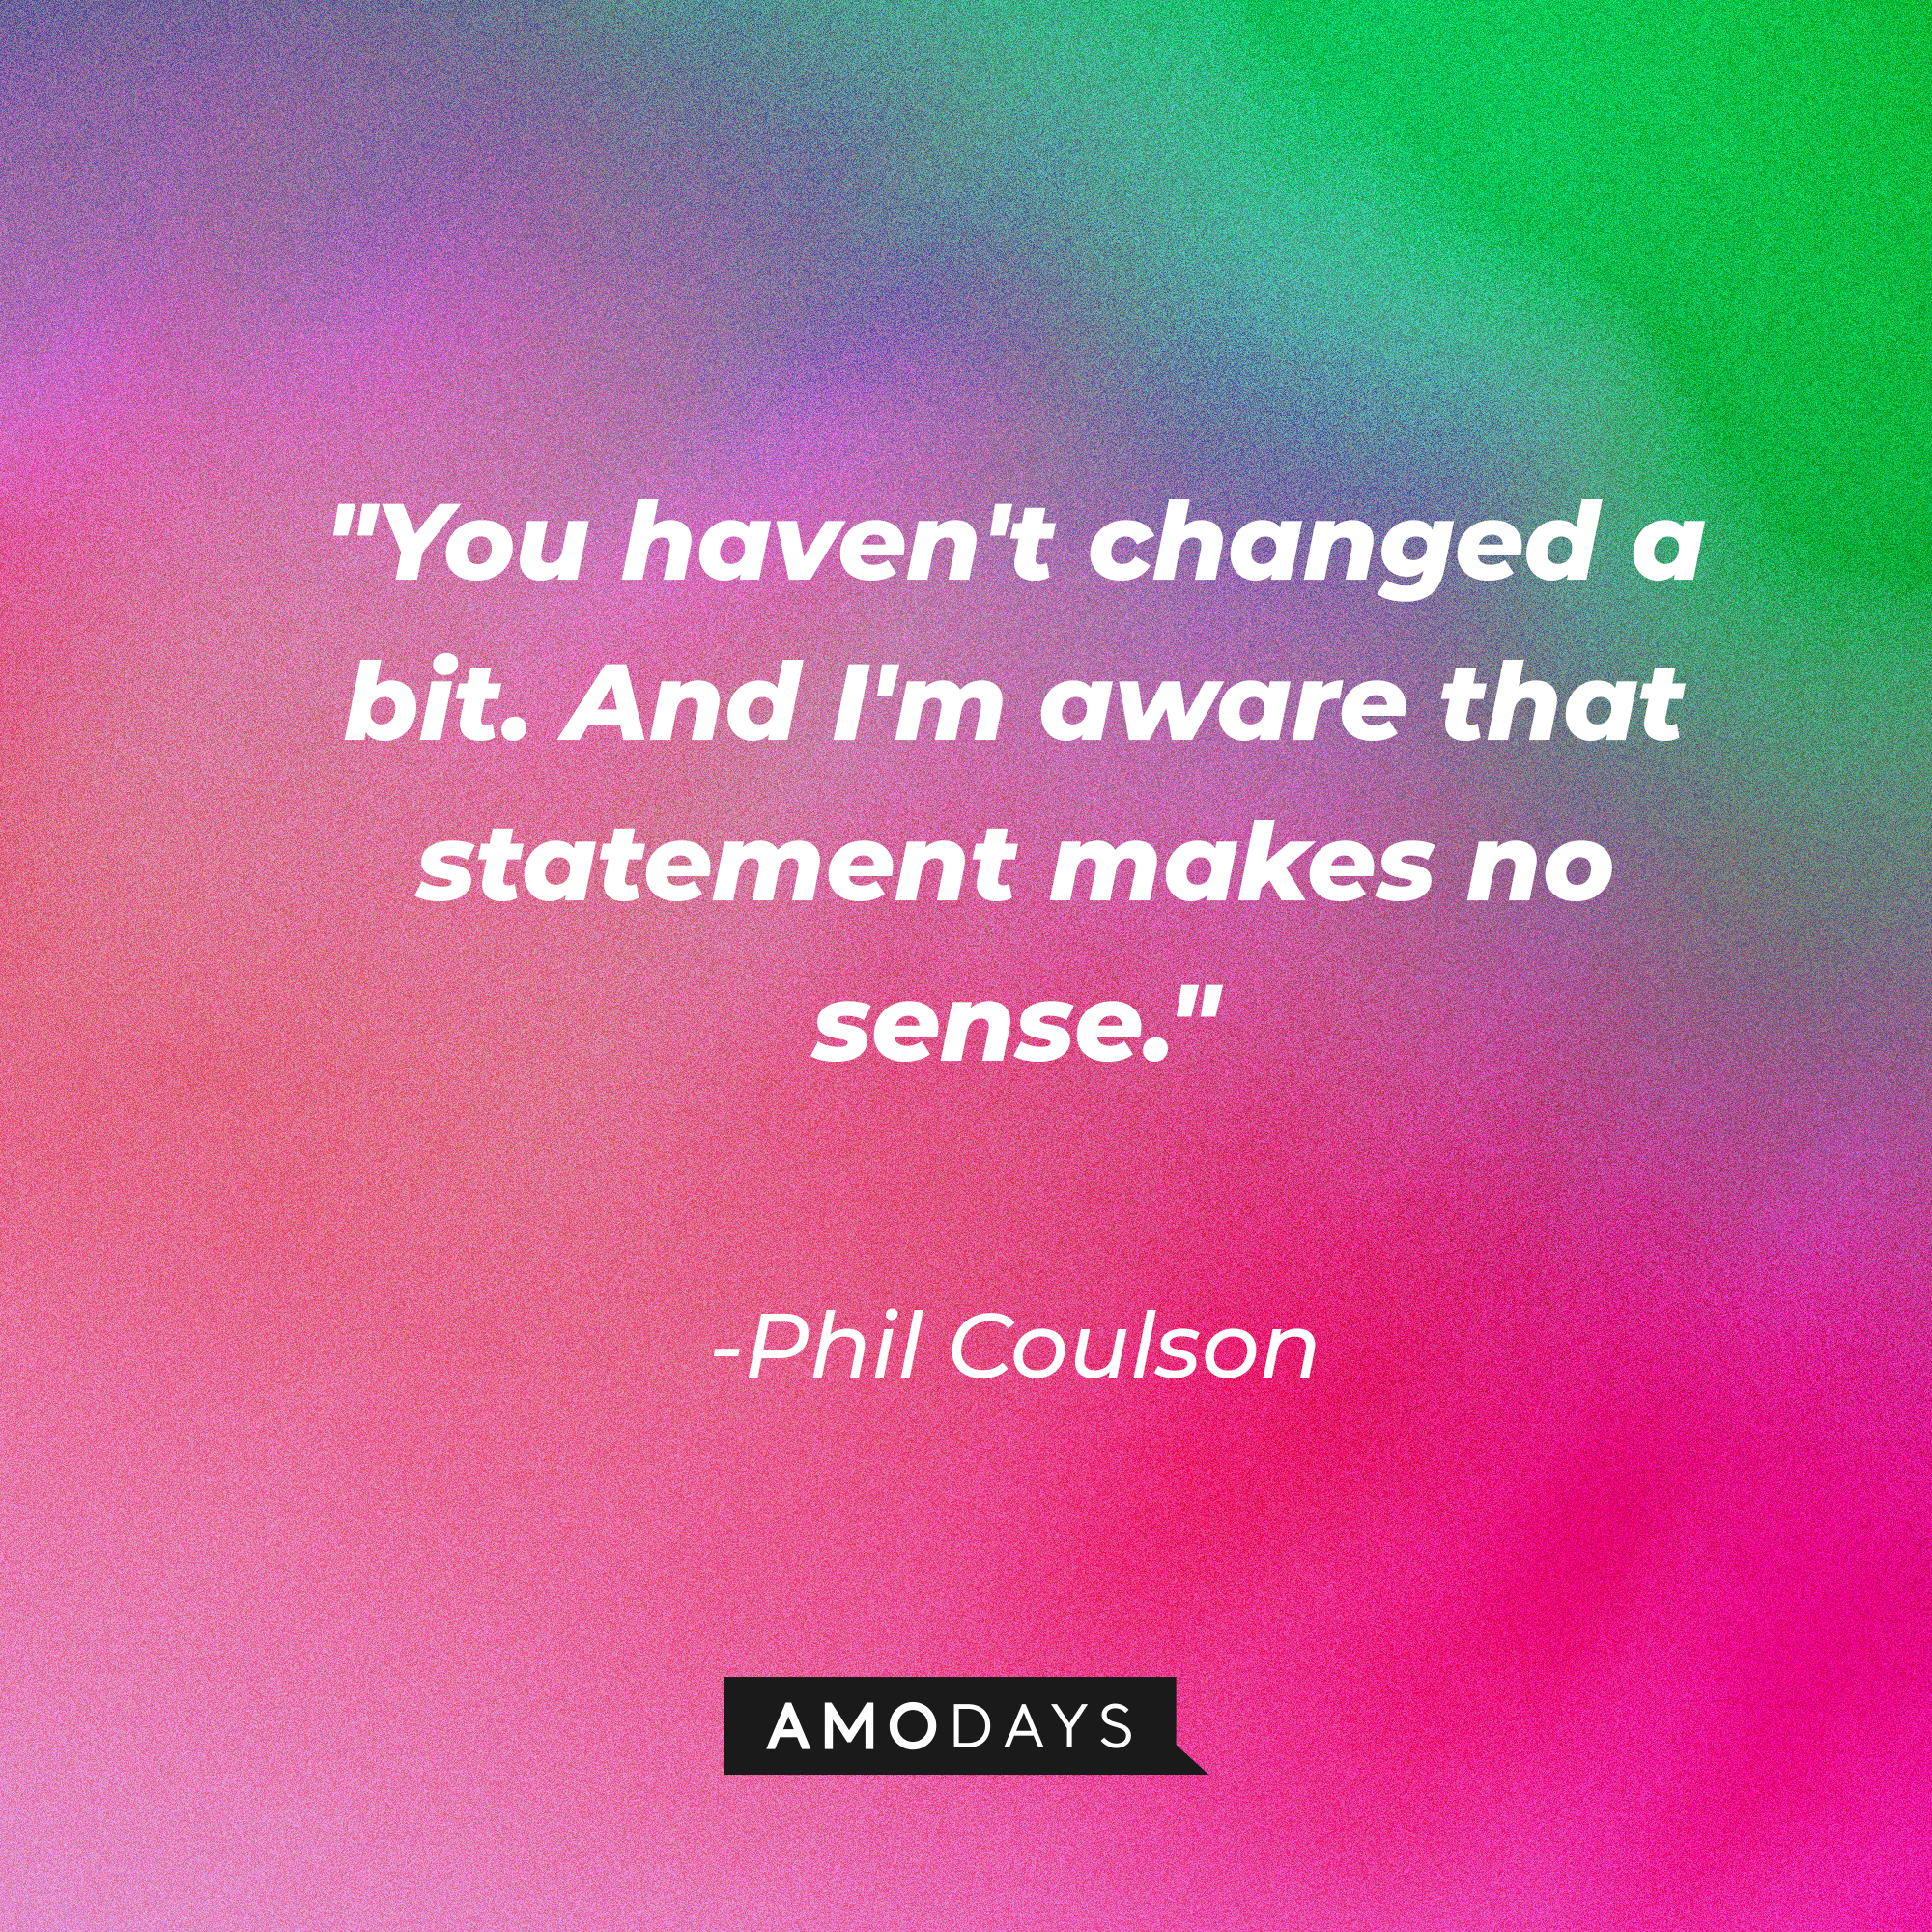 Phil Coulson's quote: "You haven't changed a bit. And I'm aware that statement makes no sense." | Source: Amodays